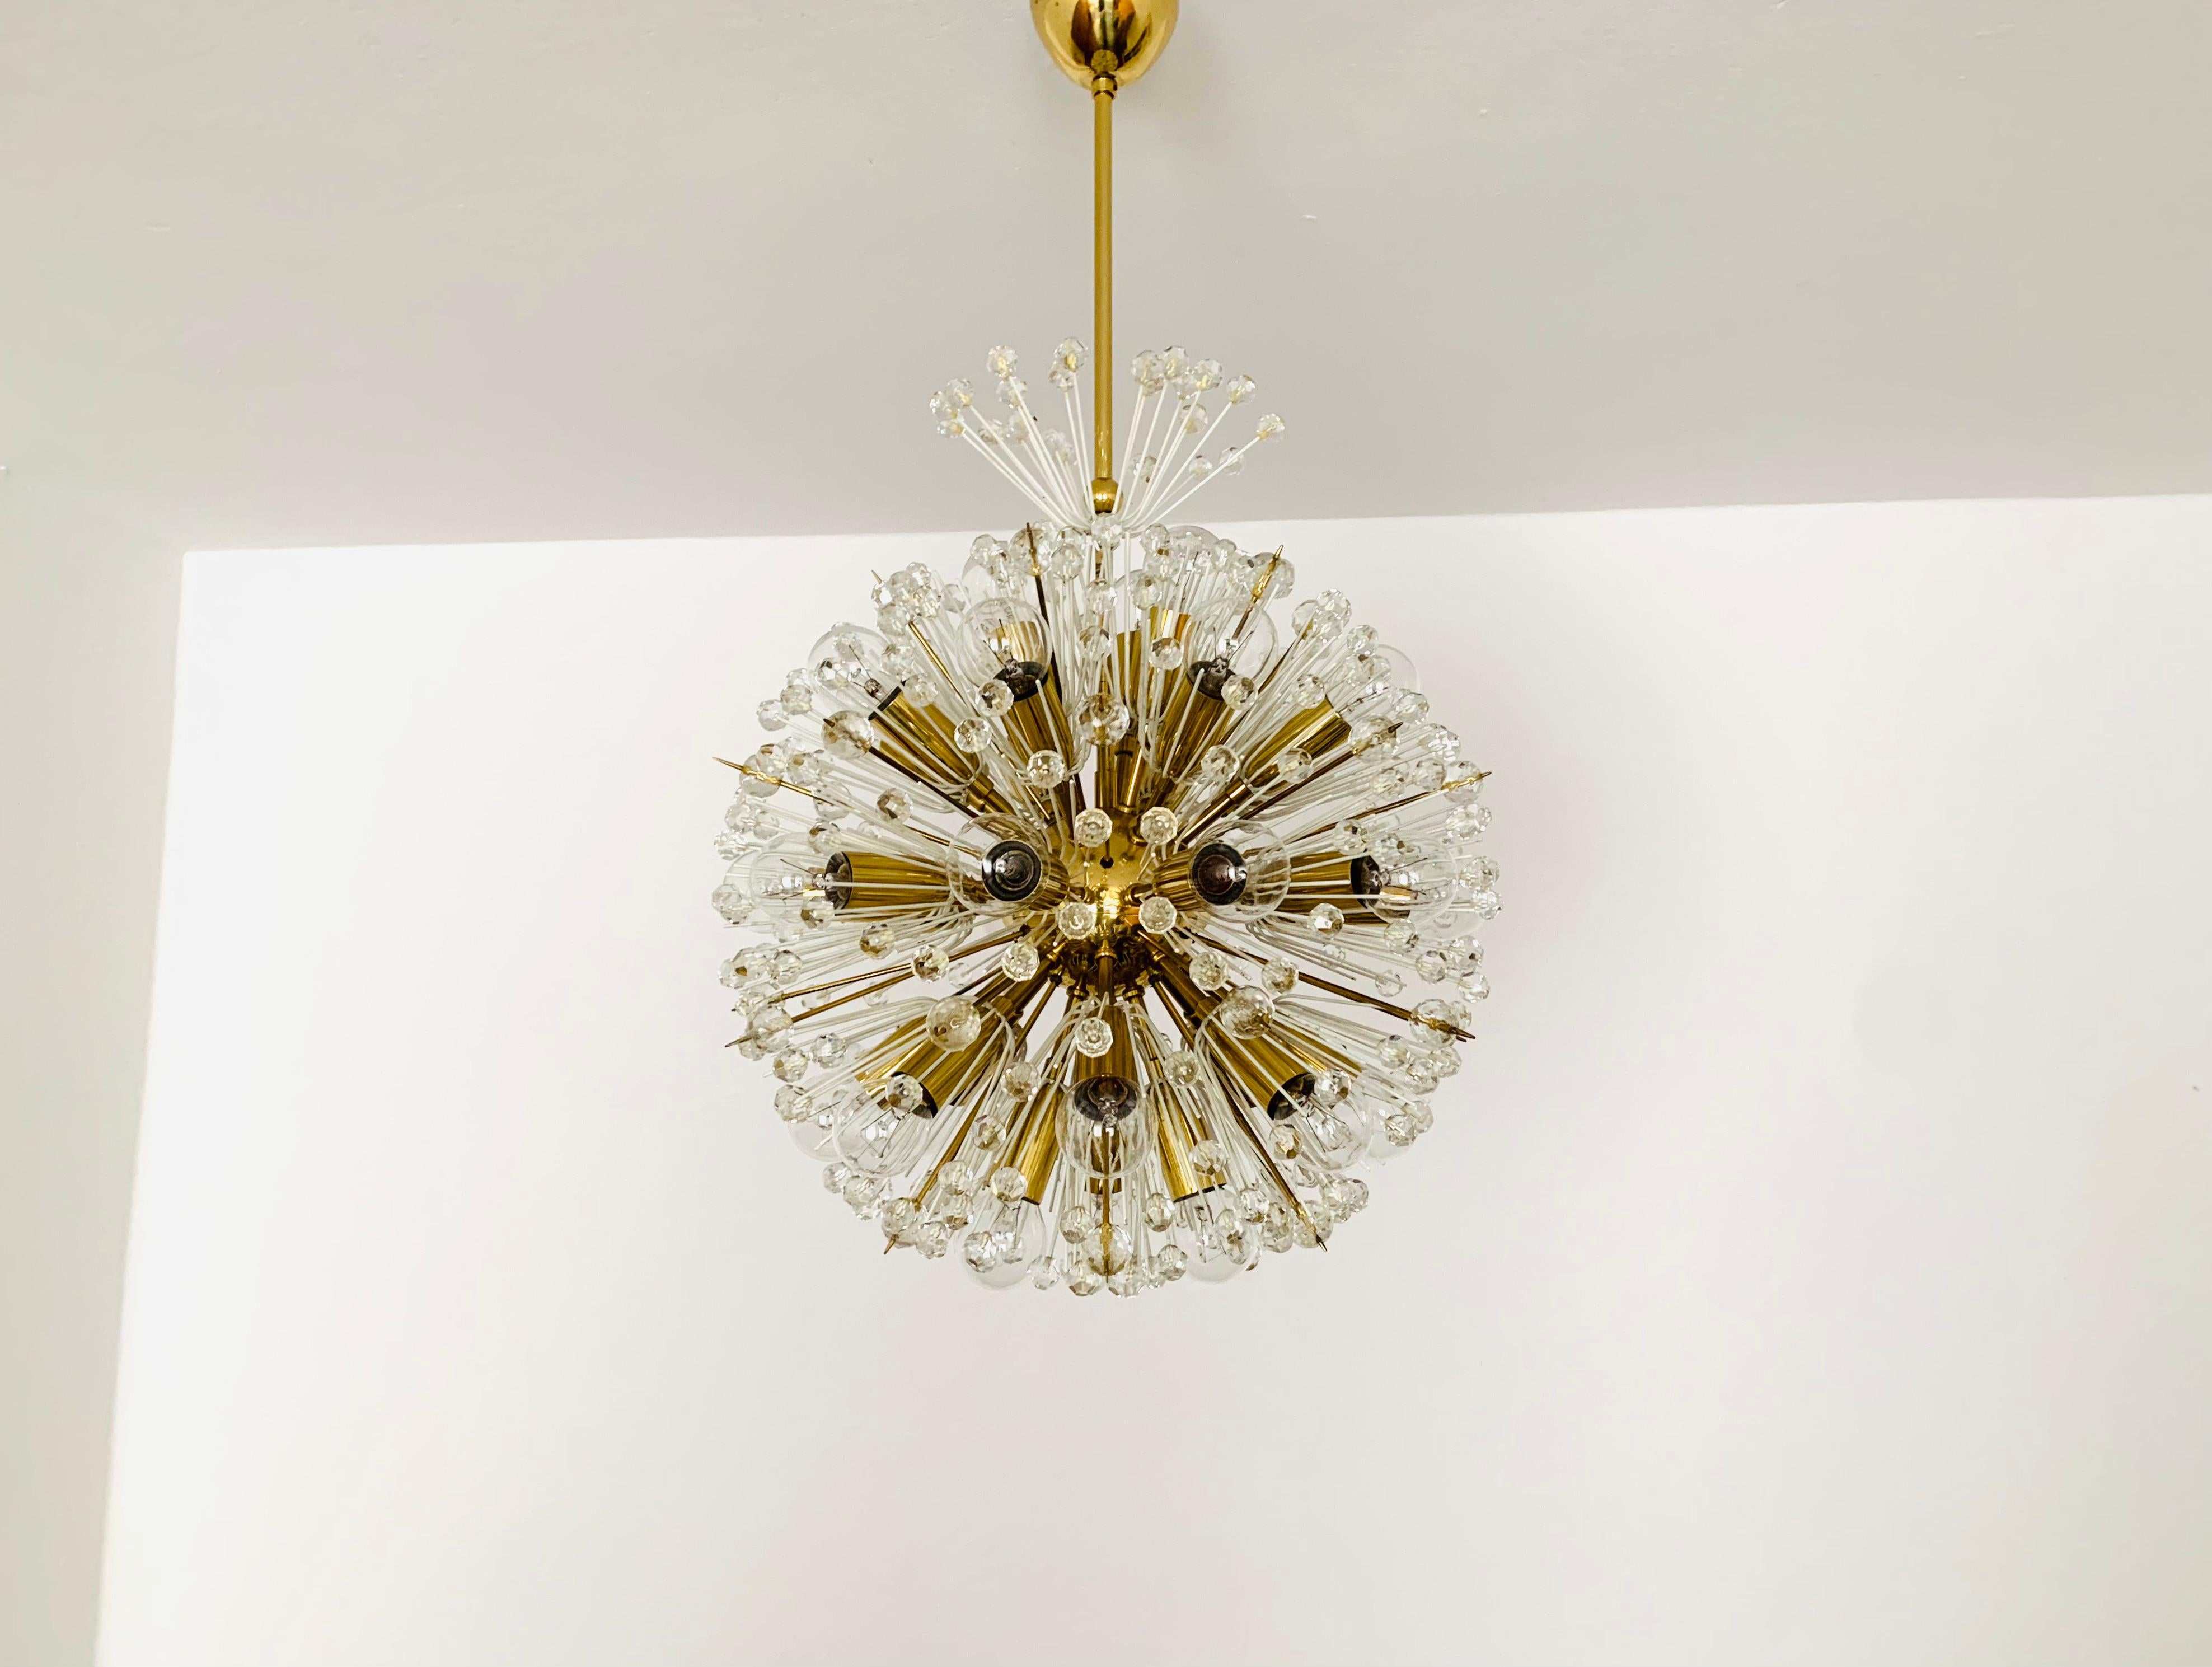 Wonderful chandelier from the 1950s.
The lamp with its lavishly decorated flowers and brass details has a very luxurious look and sparkles particularly beautifully.
The design and the materials used create a great glittering light.
A stunning lamp